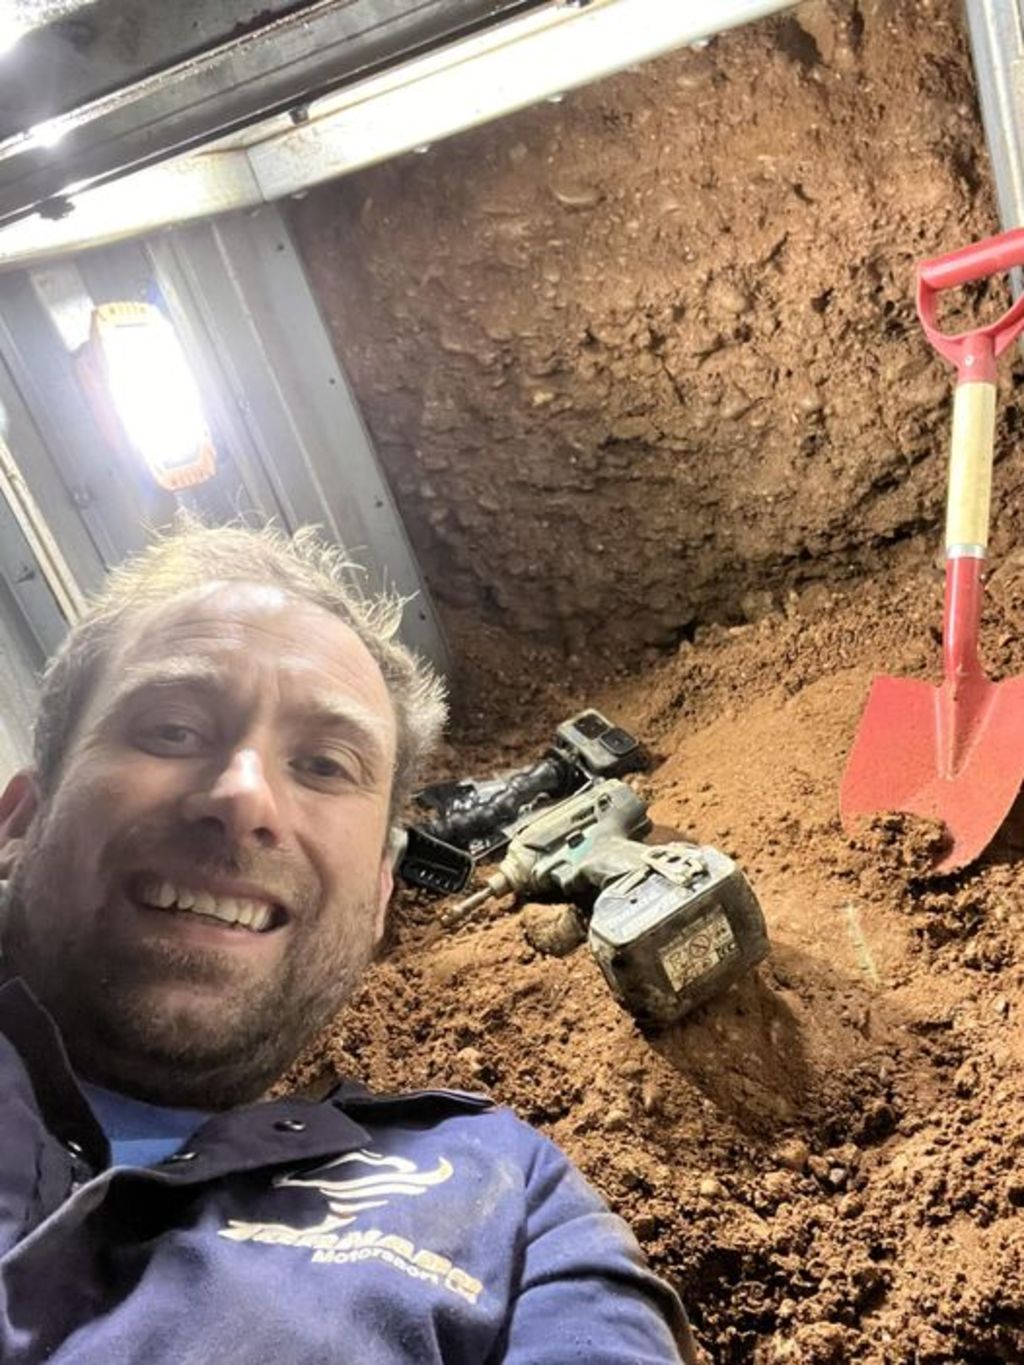 British man Dave Billings is digging a 40-foot tunnel from his home to an underground bar. Photo: Facebook/Dave Billings